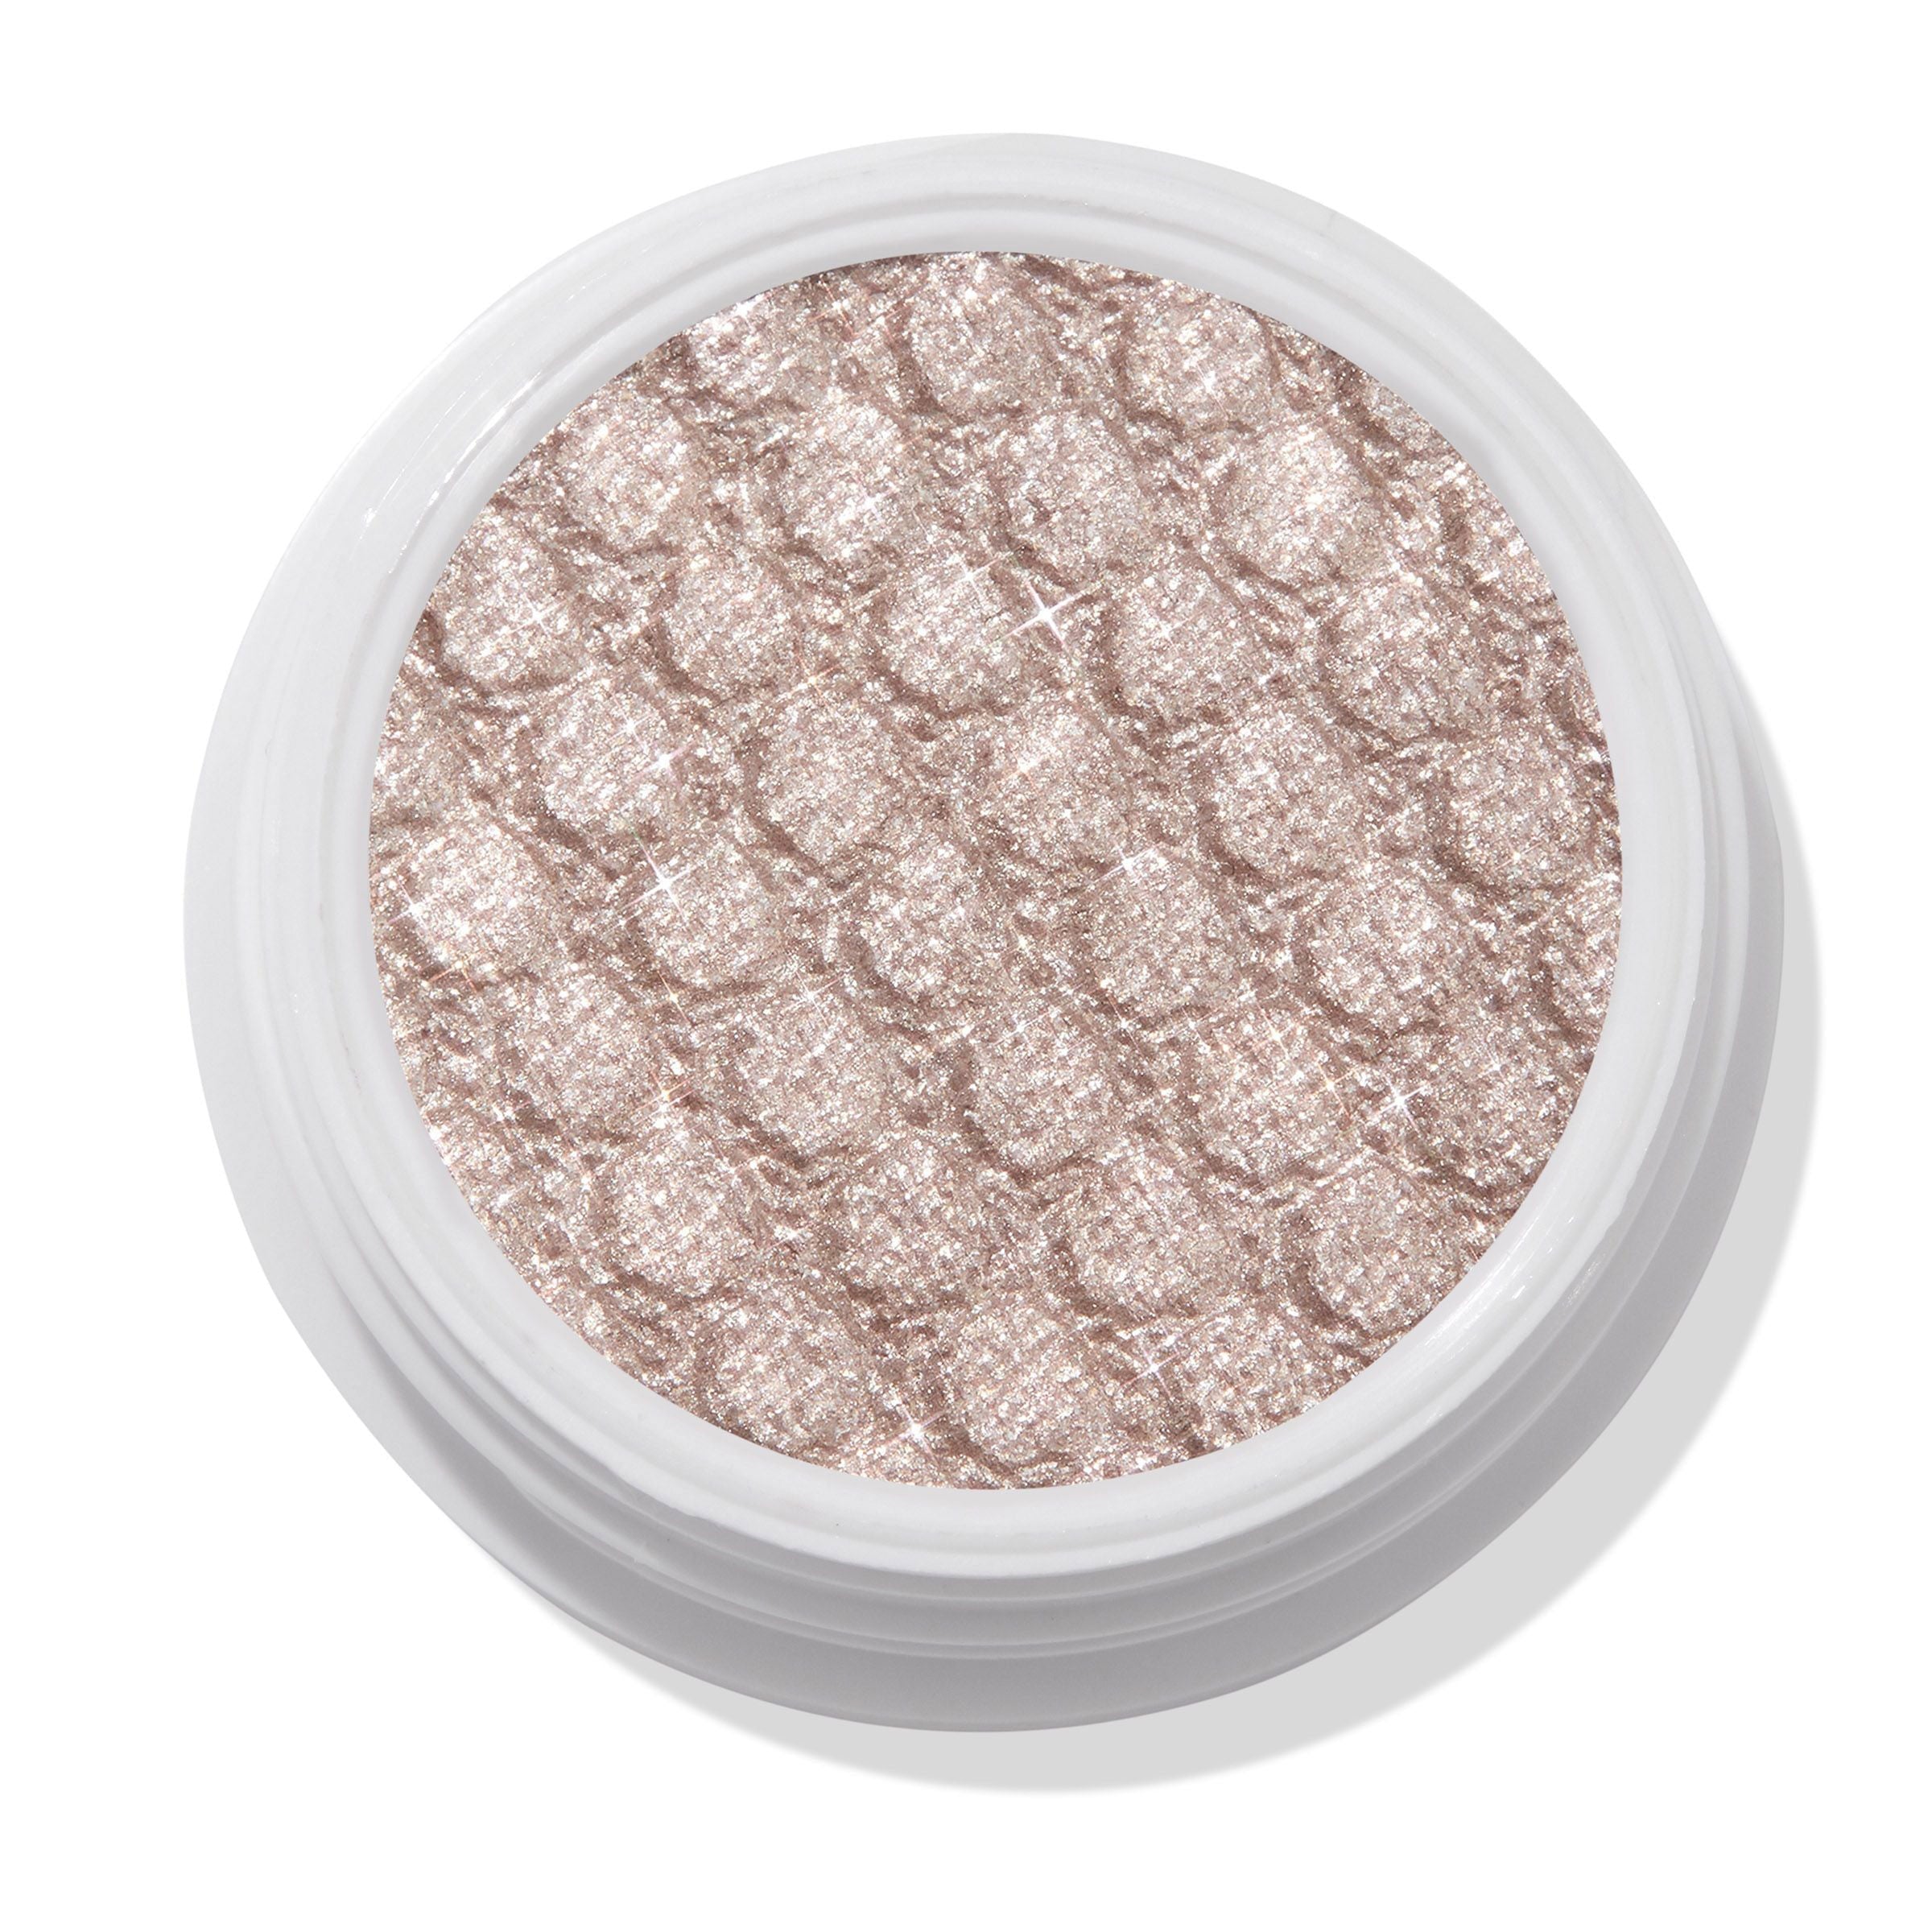 Colourpop I Heart This taupe with a silver Ultra-Glitter sparkle Super Shock eye Shadow